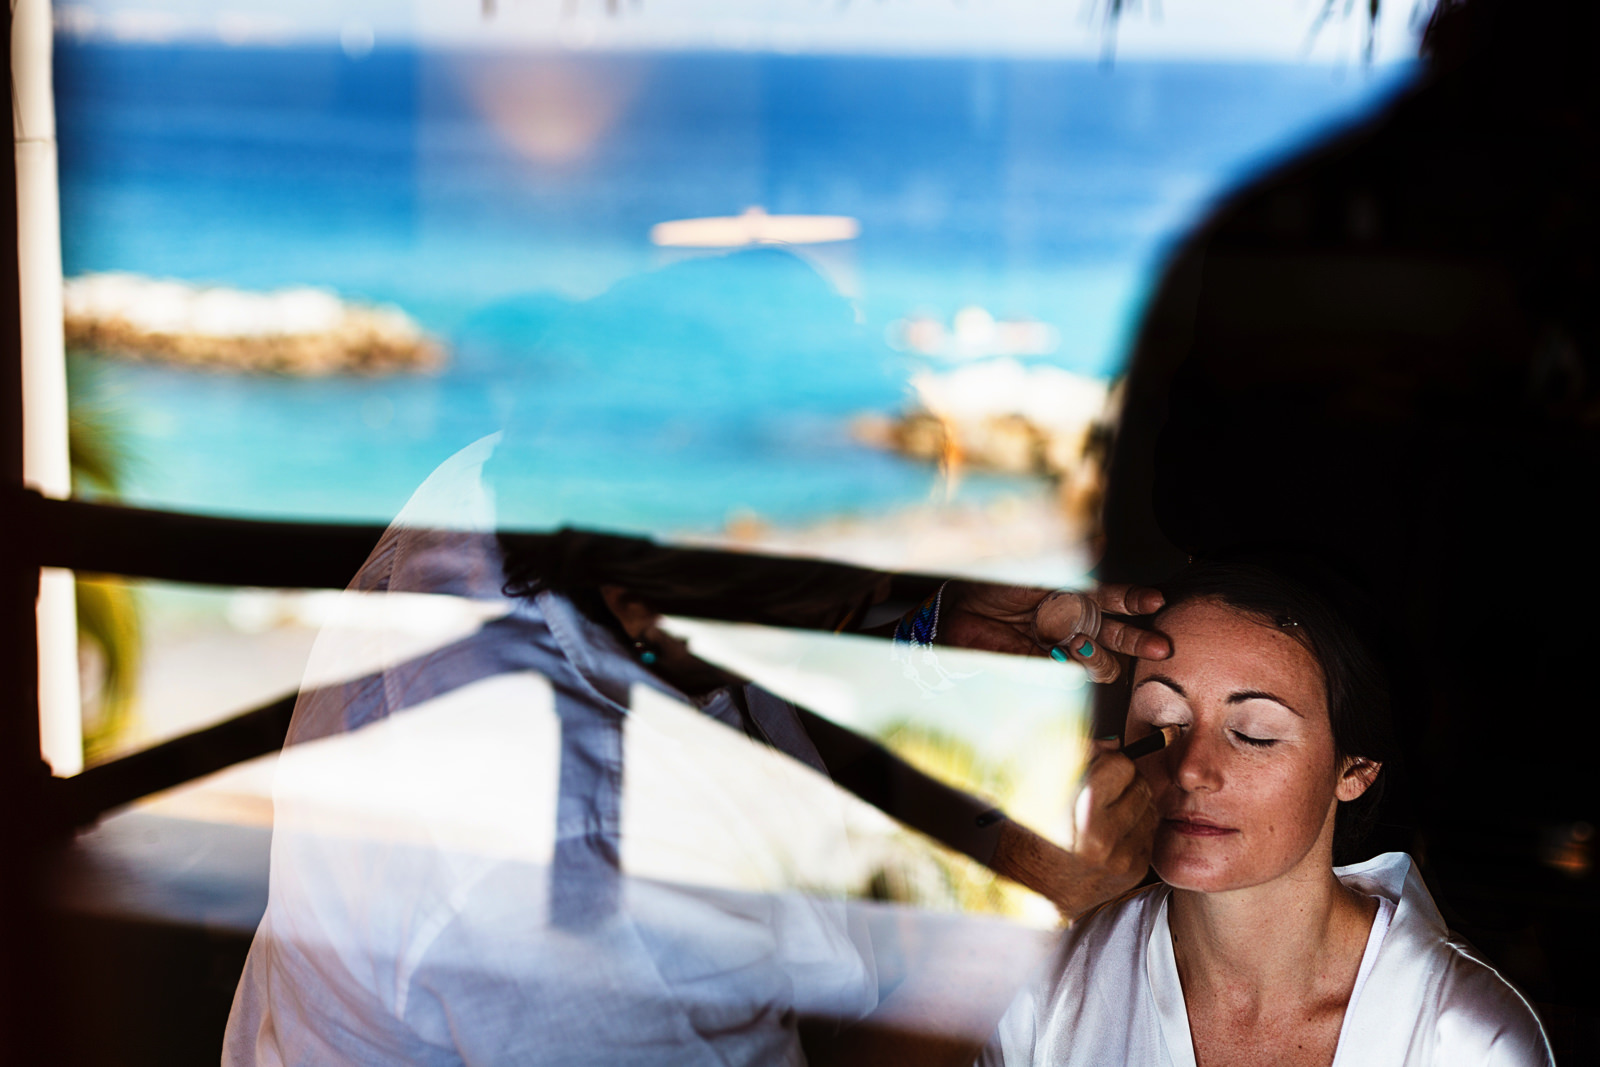 Bride having her make-up in front of a window with the reflection of the ocean